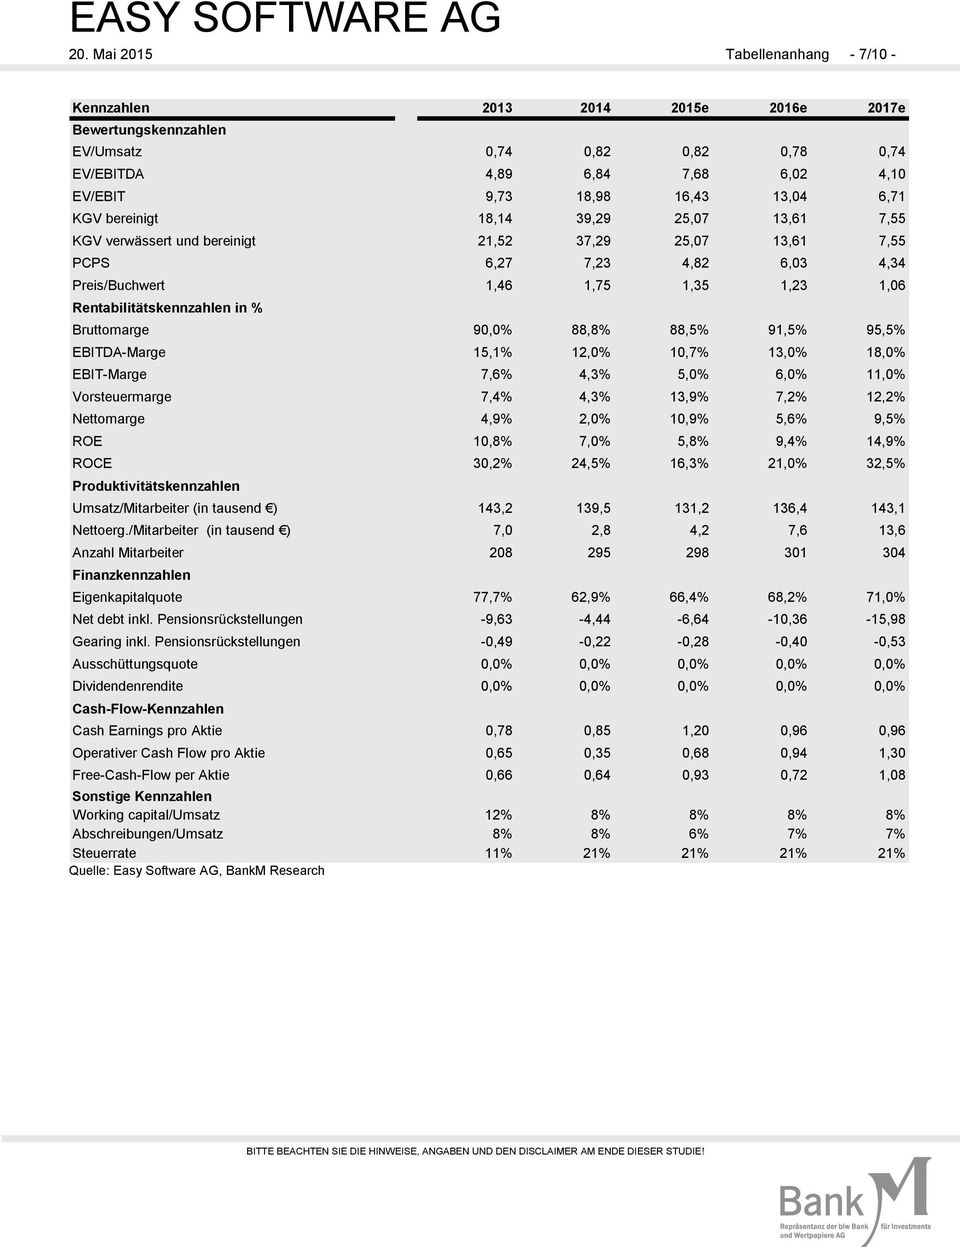 in % Bruttomarge 90,0% 88,8% 88,5% 91,5% 95,5% EBITDA-Marge 15,1% 12,0% 10,7% 13,0% 18,0% EBIT-Marge 7,6% 4,3% 5,0% 6,0% 11,0% Vorsteuermarge 7,4% 4,3% 13,9% 7,2% 12,2% Nettomarge 4,9% 2,0% 10,9%